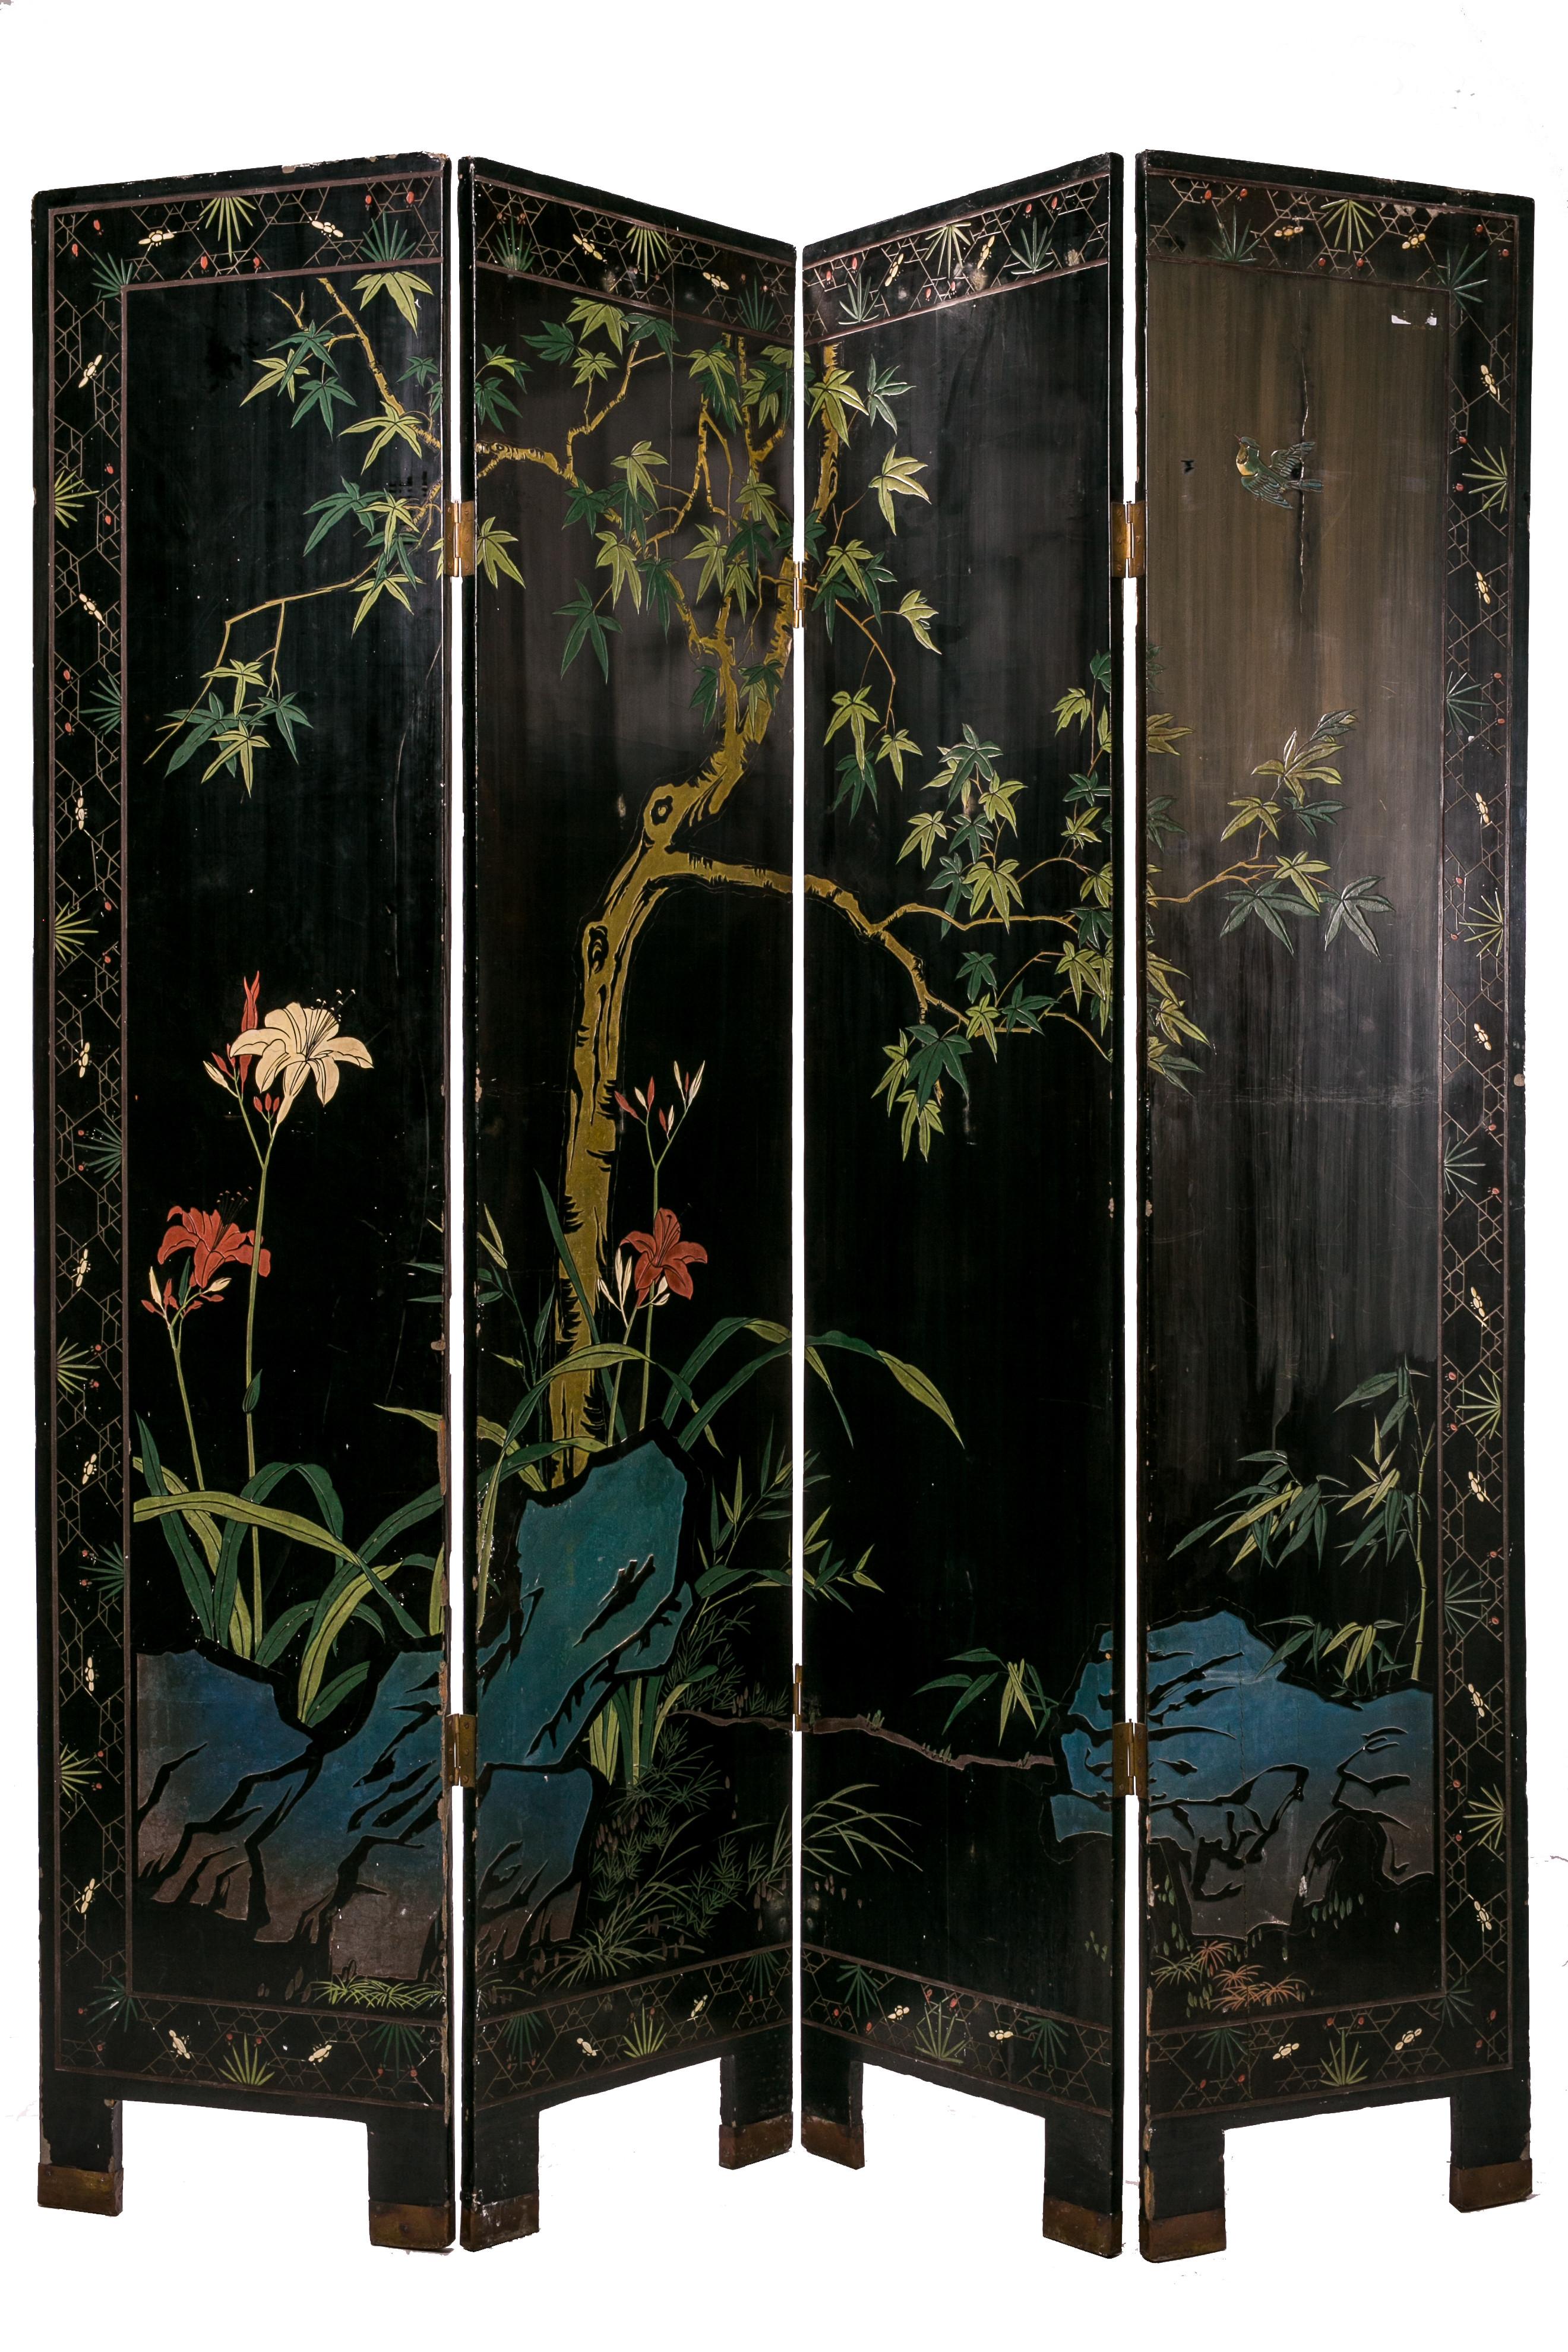 Elegant screen painted in Japanese lacquer with scenes of imperial life.
Made with 4 wooden and lacquer doors, also painted on the back.
Period: early 1900s
Measures: L. cm 160 - H. cm 184 

(D,R)
Code: 10776.